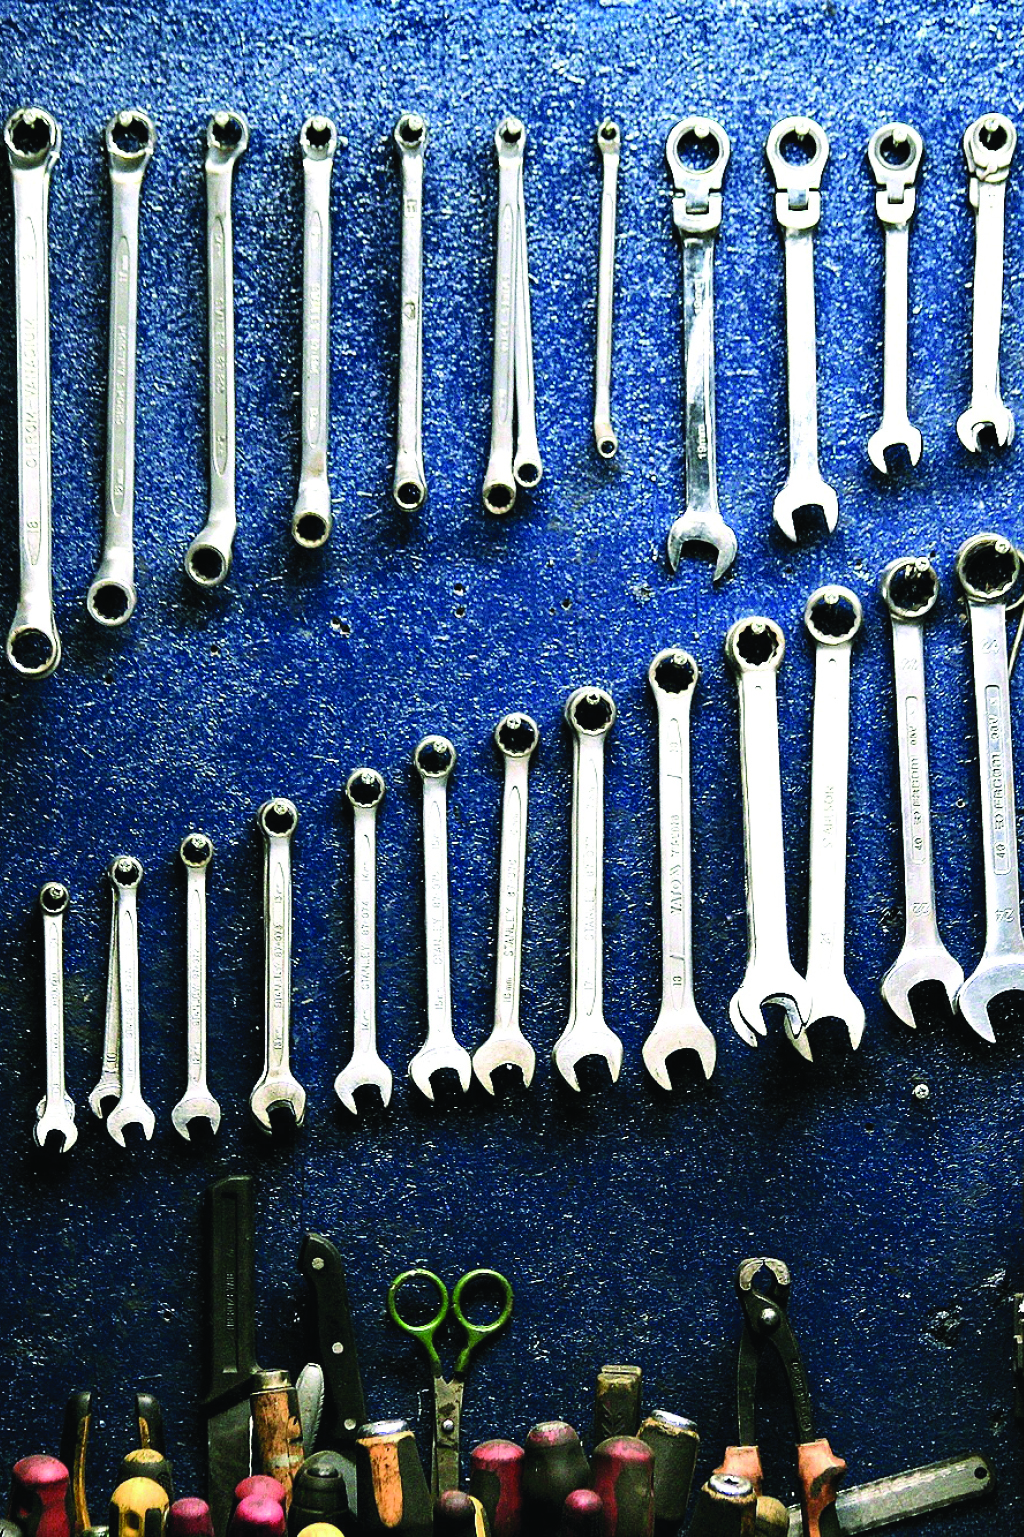 various wrenches organized along a blue wall